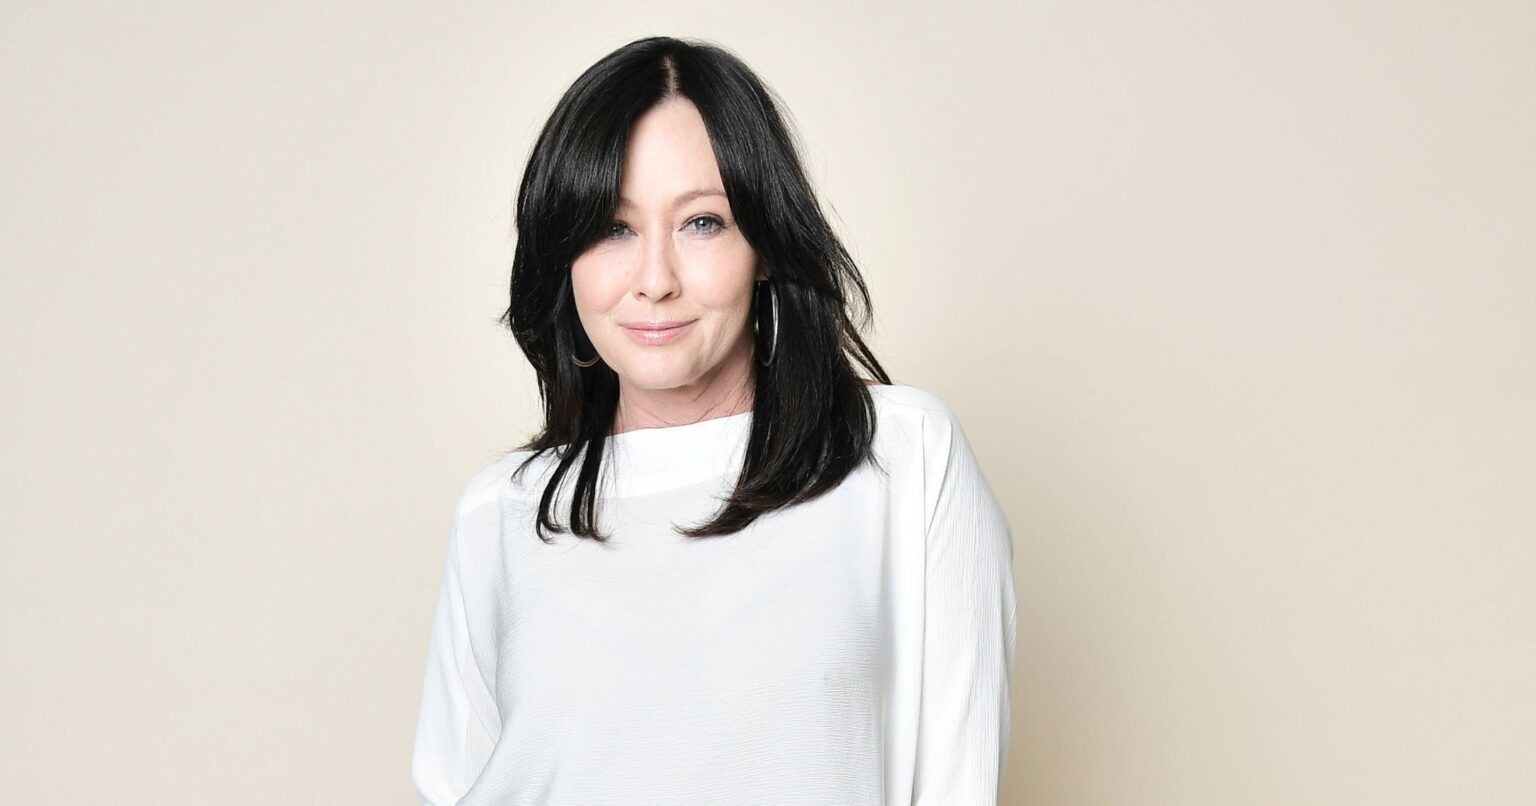 Shannen Doherty's breast cancer diagnosis got worse. Read how Doherty is staying strong and which friends are lending her support.